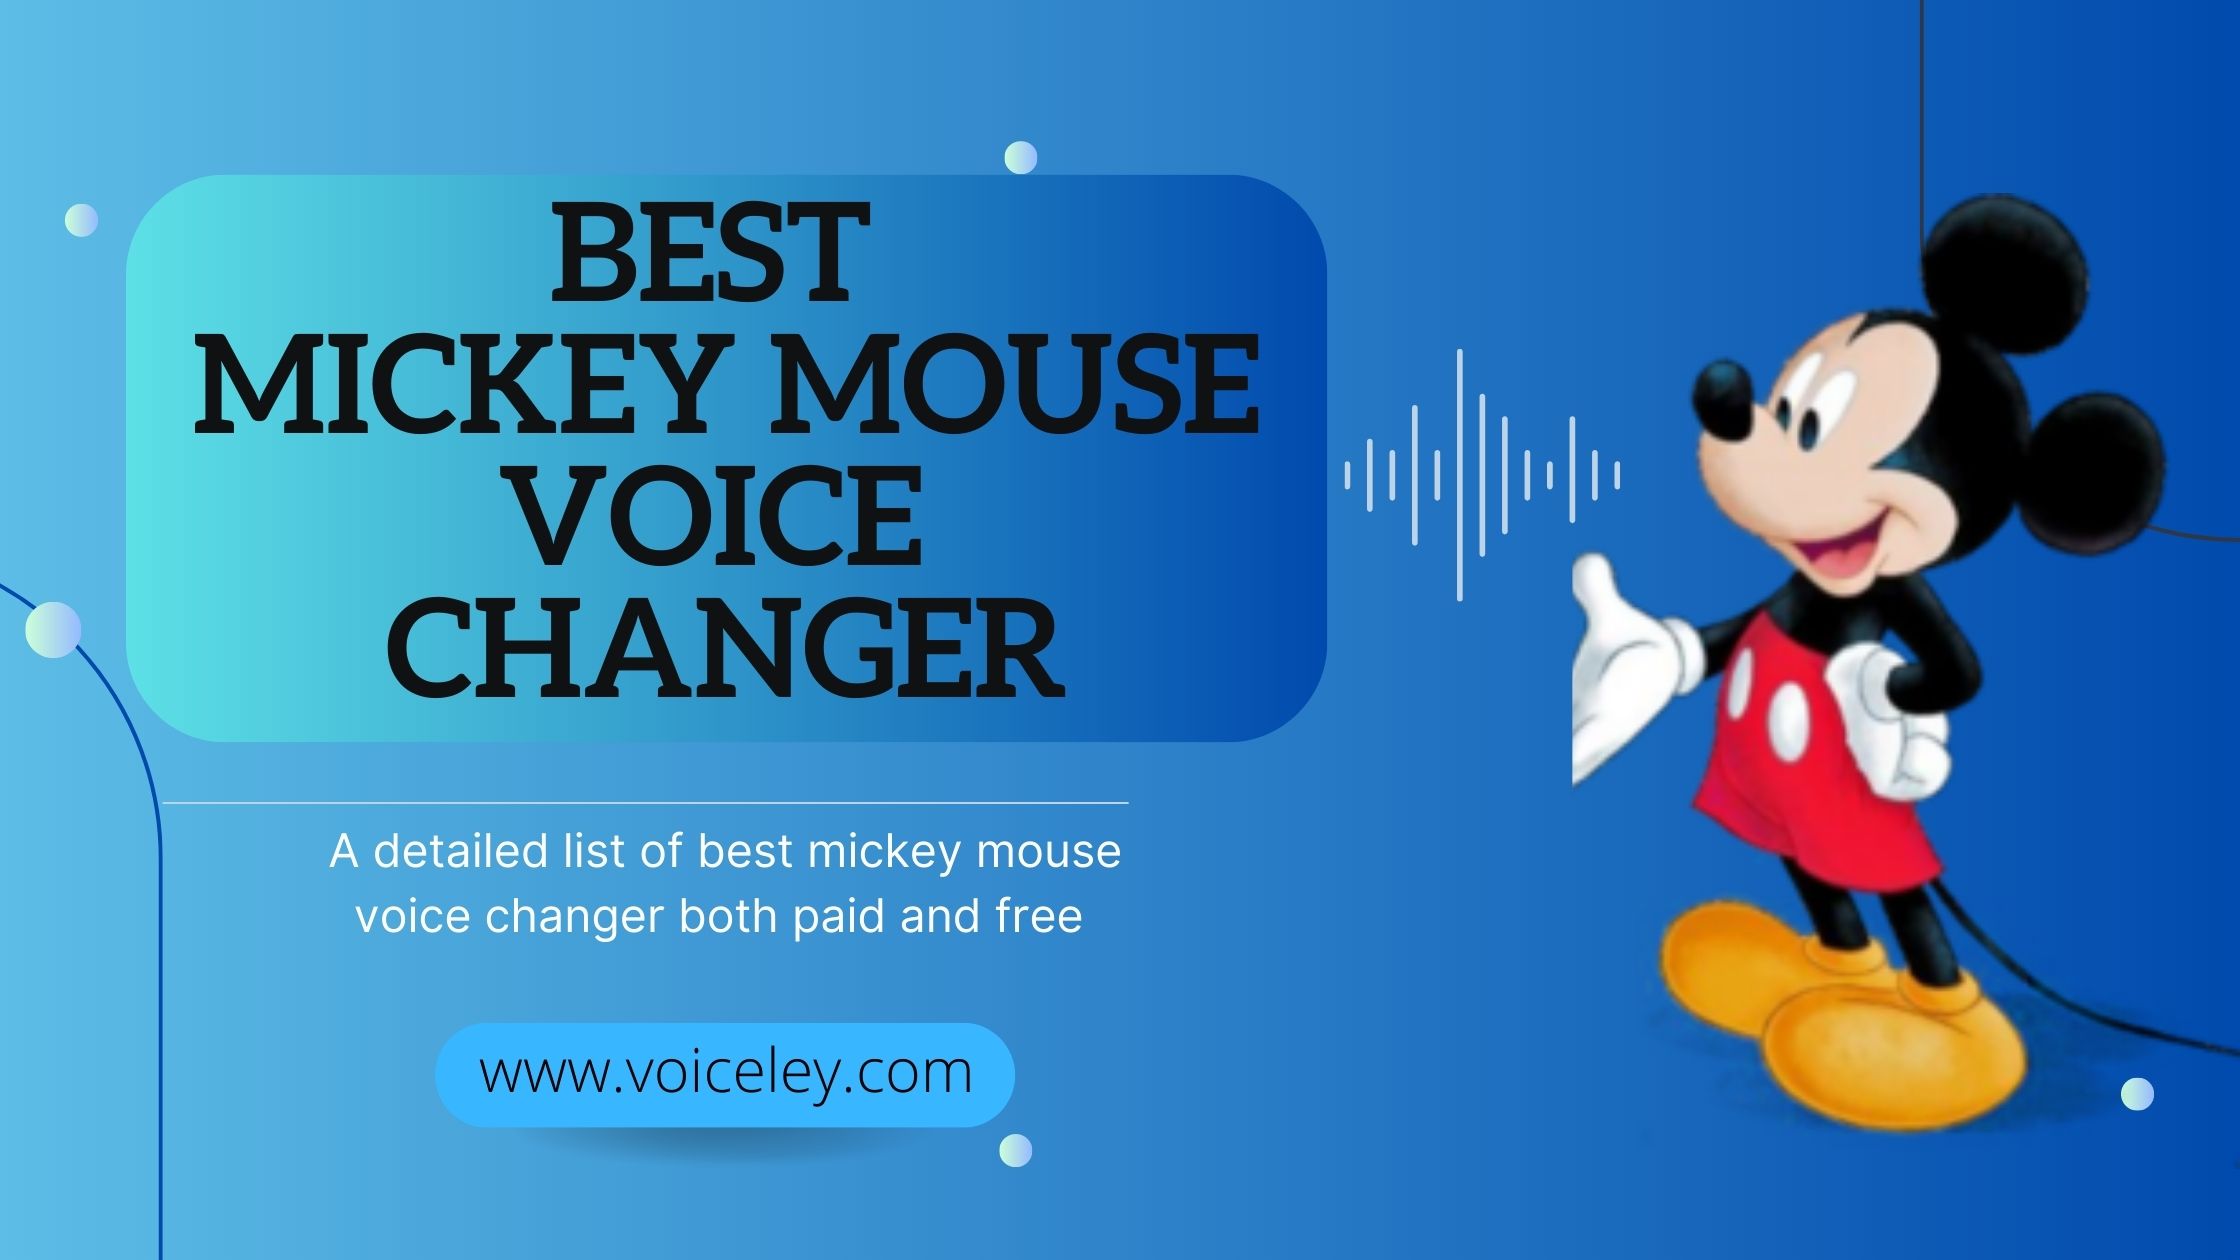 Best Mickey Mouse Voice changer